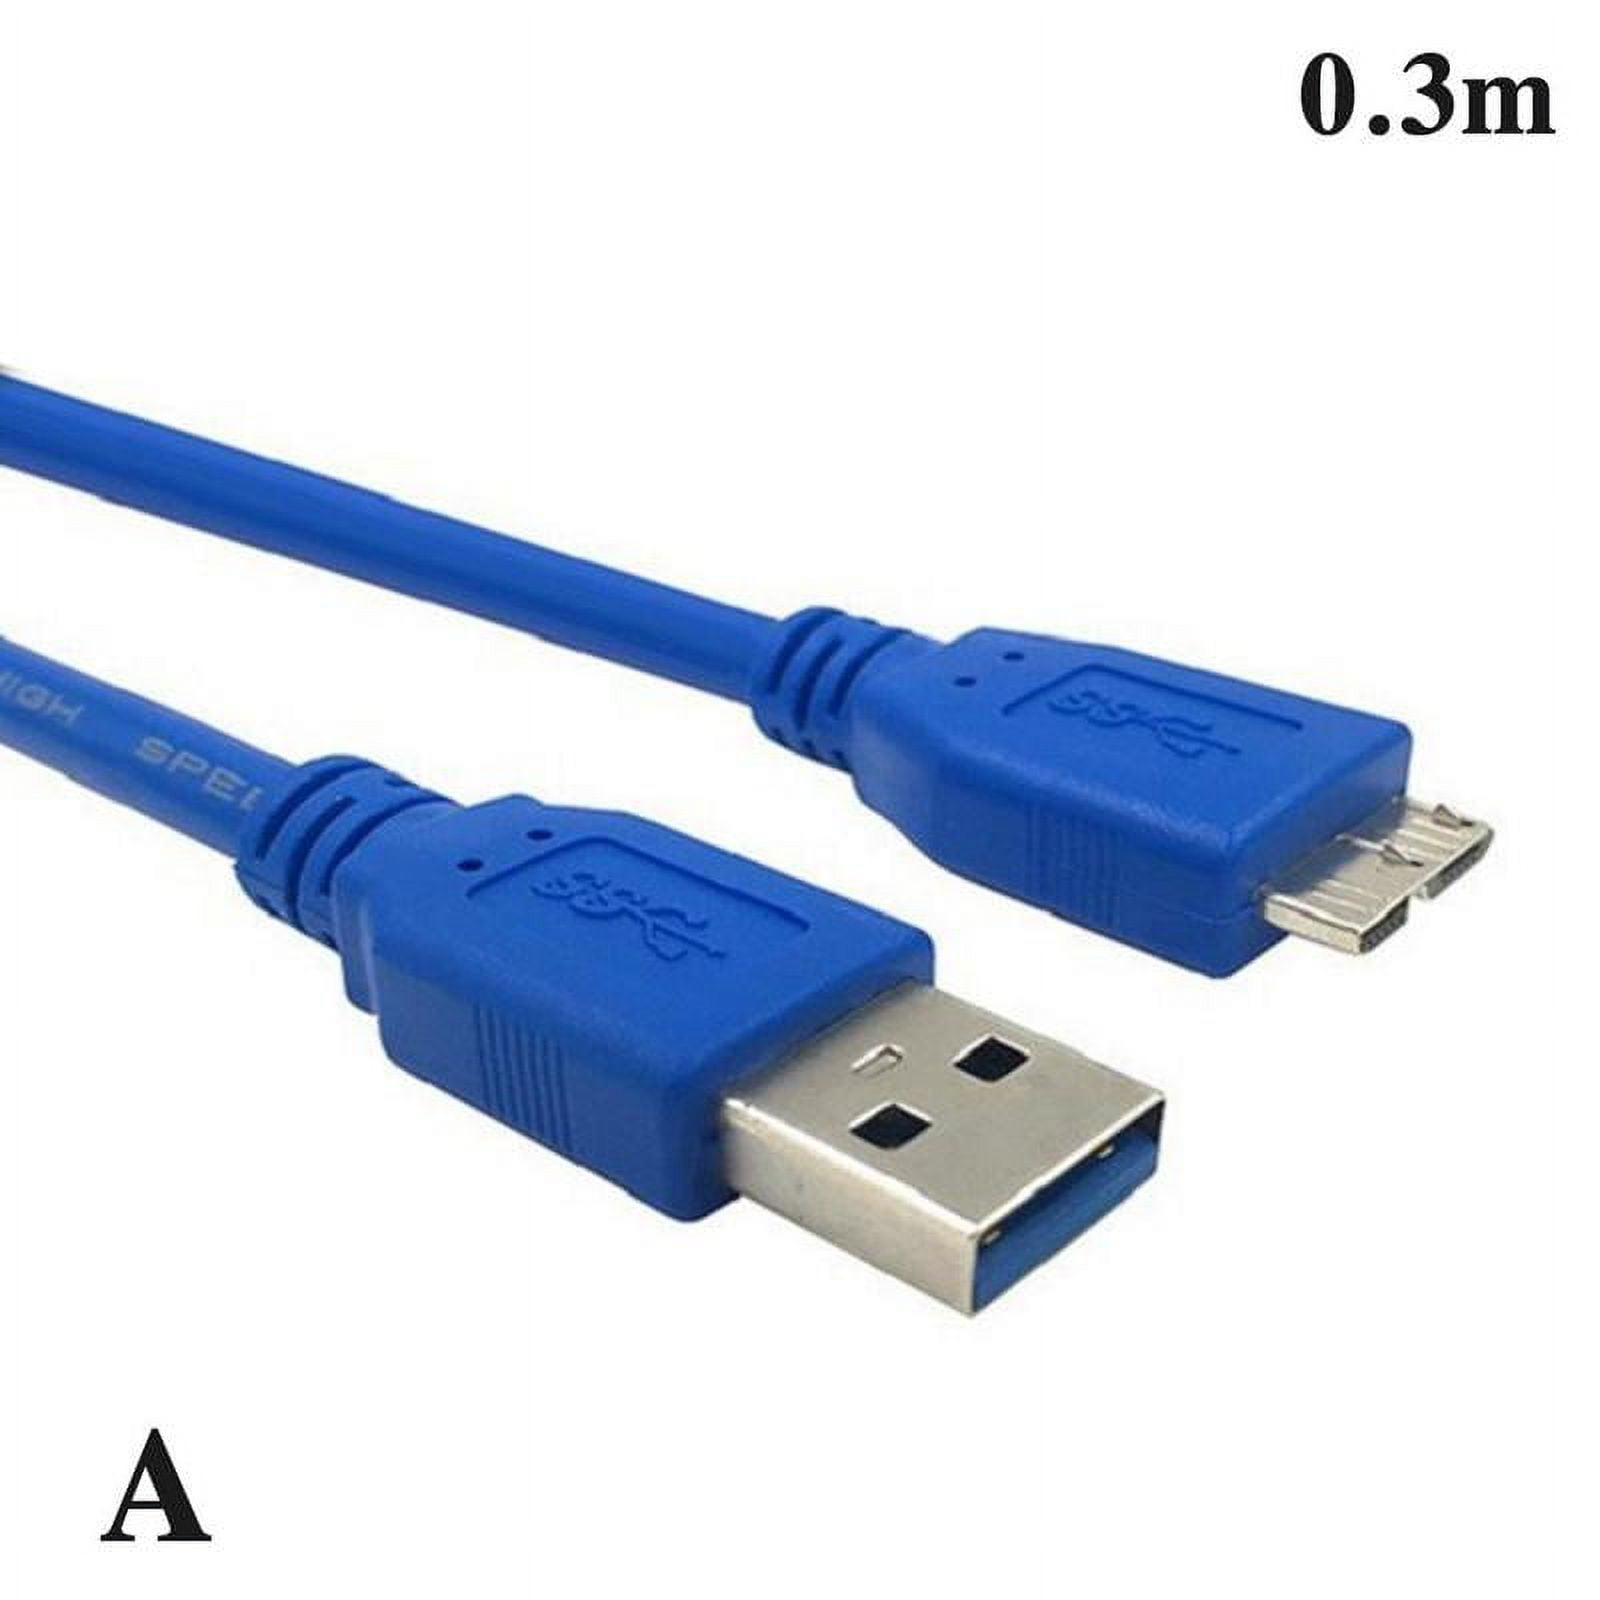  Cable Cord